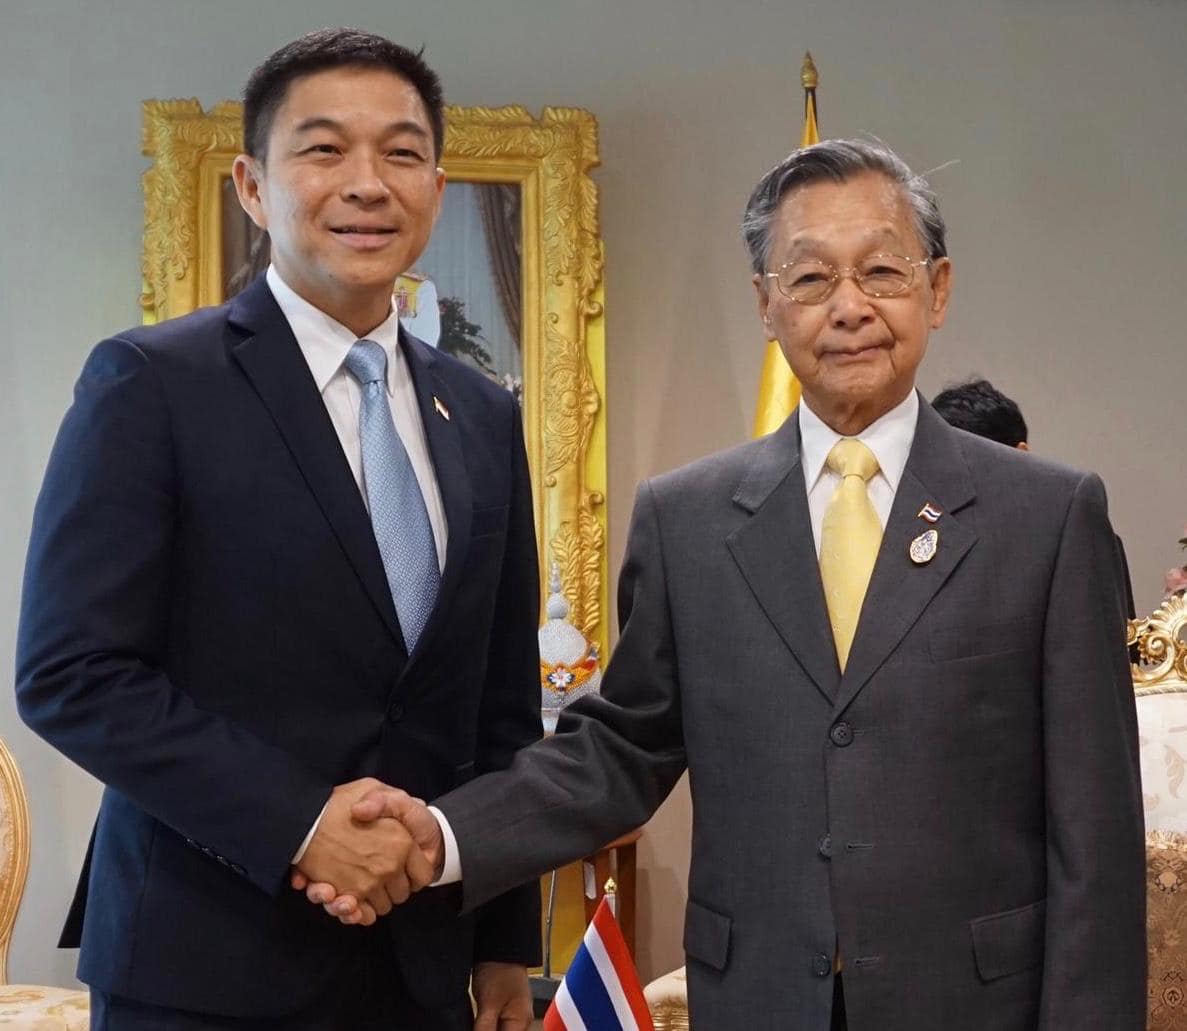 With his counterpart, H.E. Chuan Leek Pai, President of the National Assembly, and twice former Prime Minister of Thailand in 2019. Photo from Tan Chuan-Jin's Facebook page.